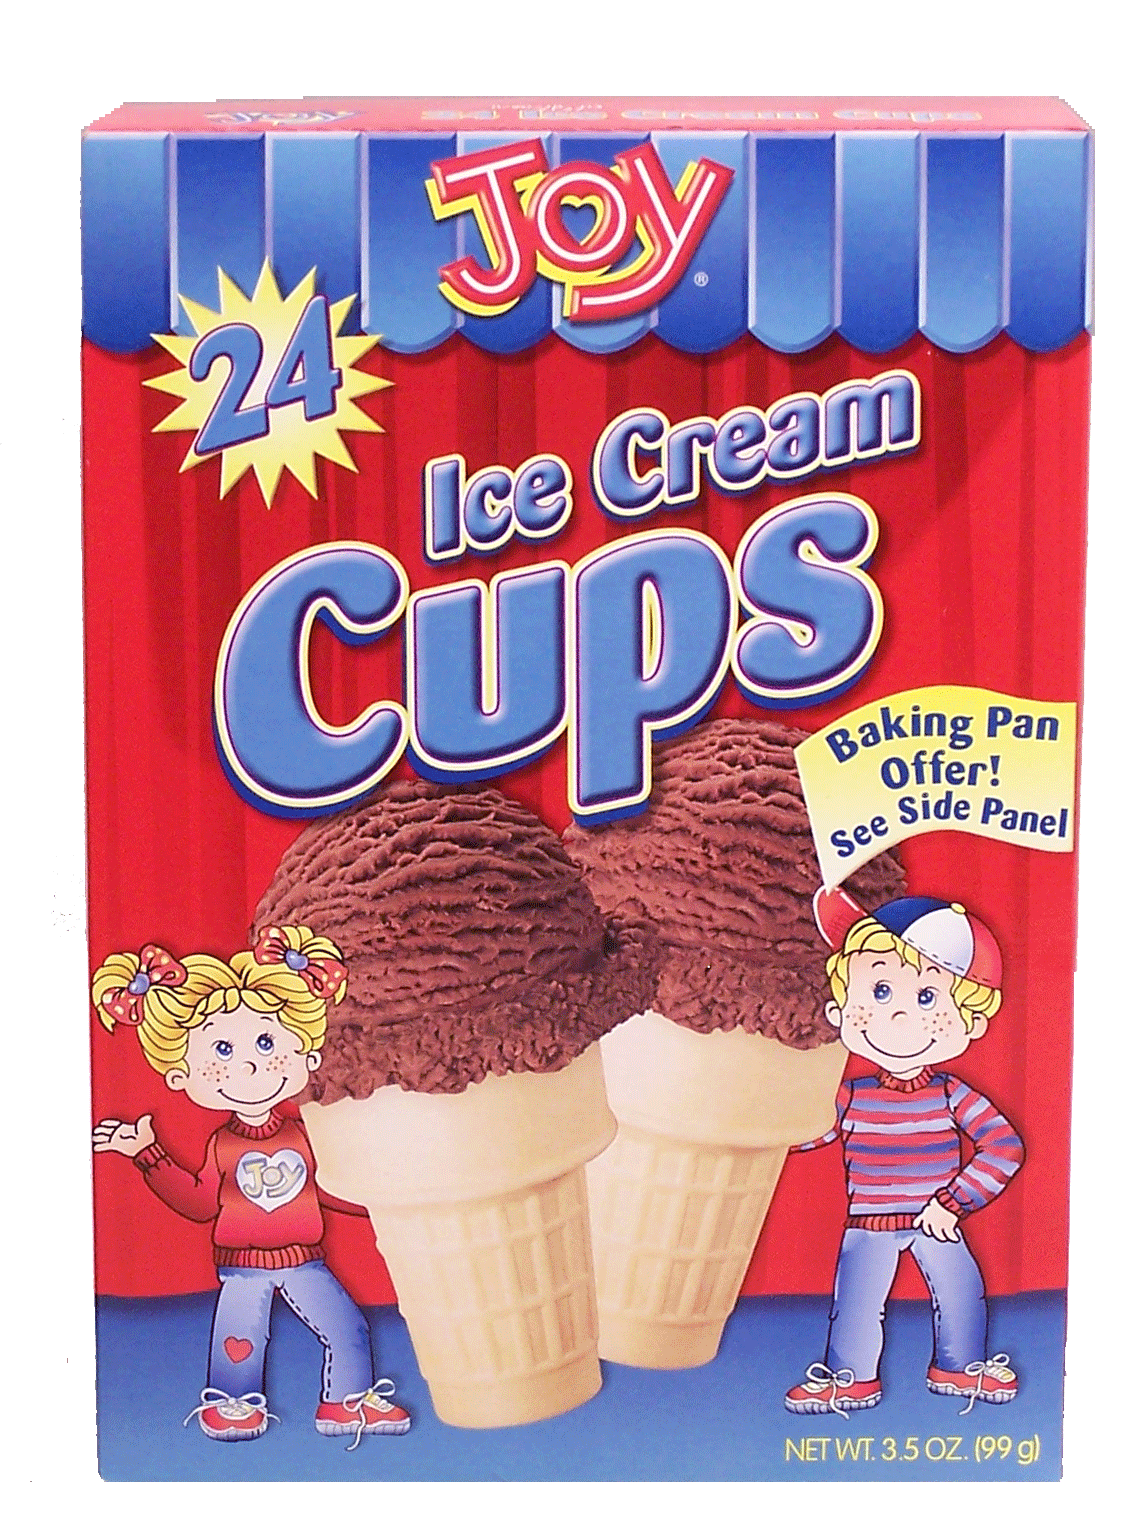 Groceries-Express.com Product Infomation for Joy ice cream cups, 24 ...